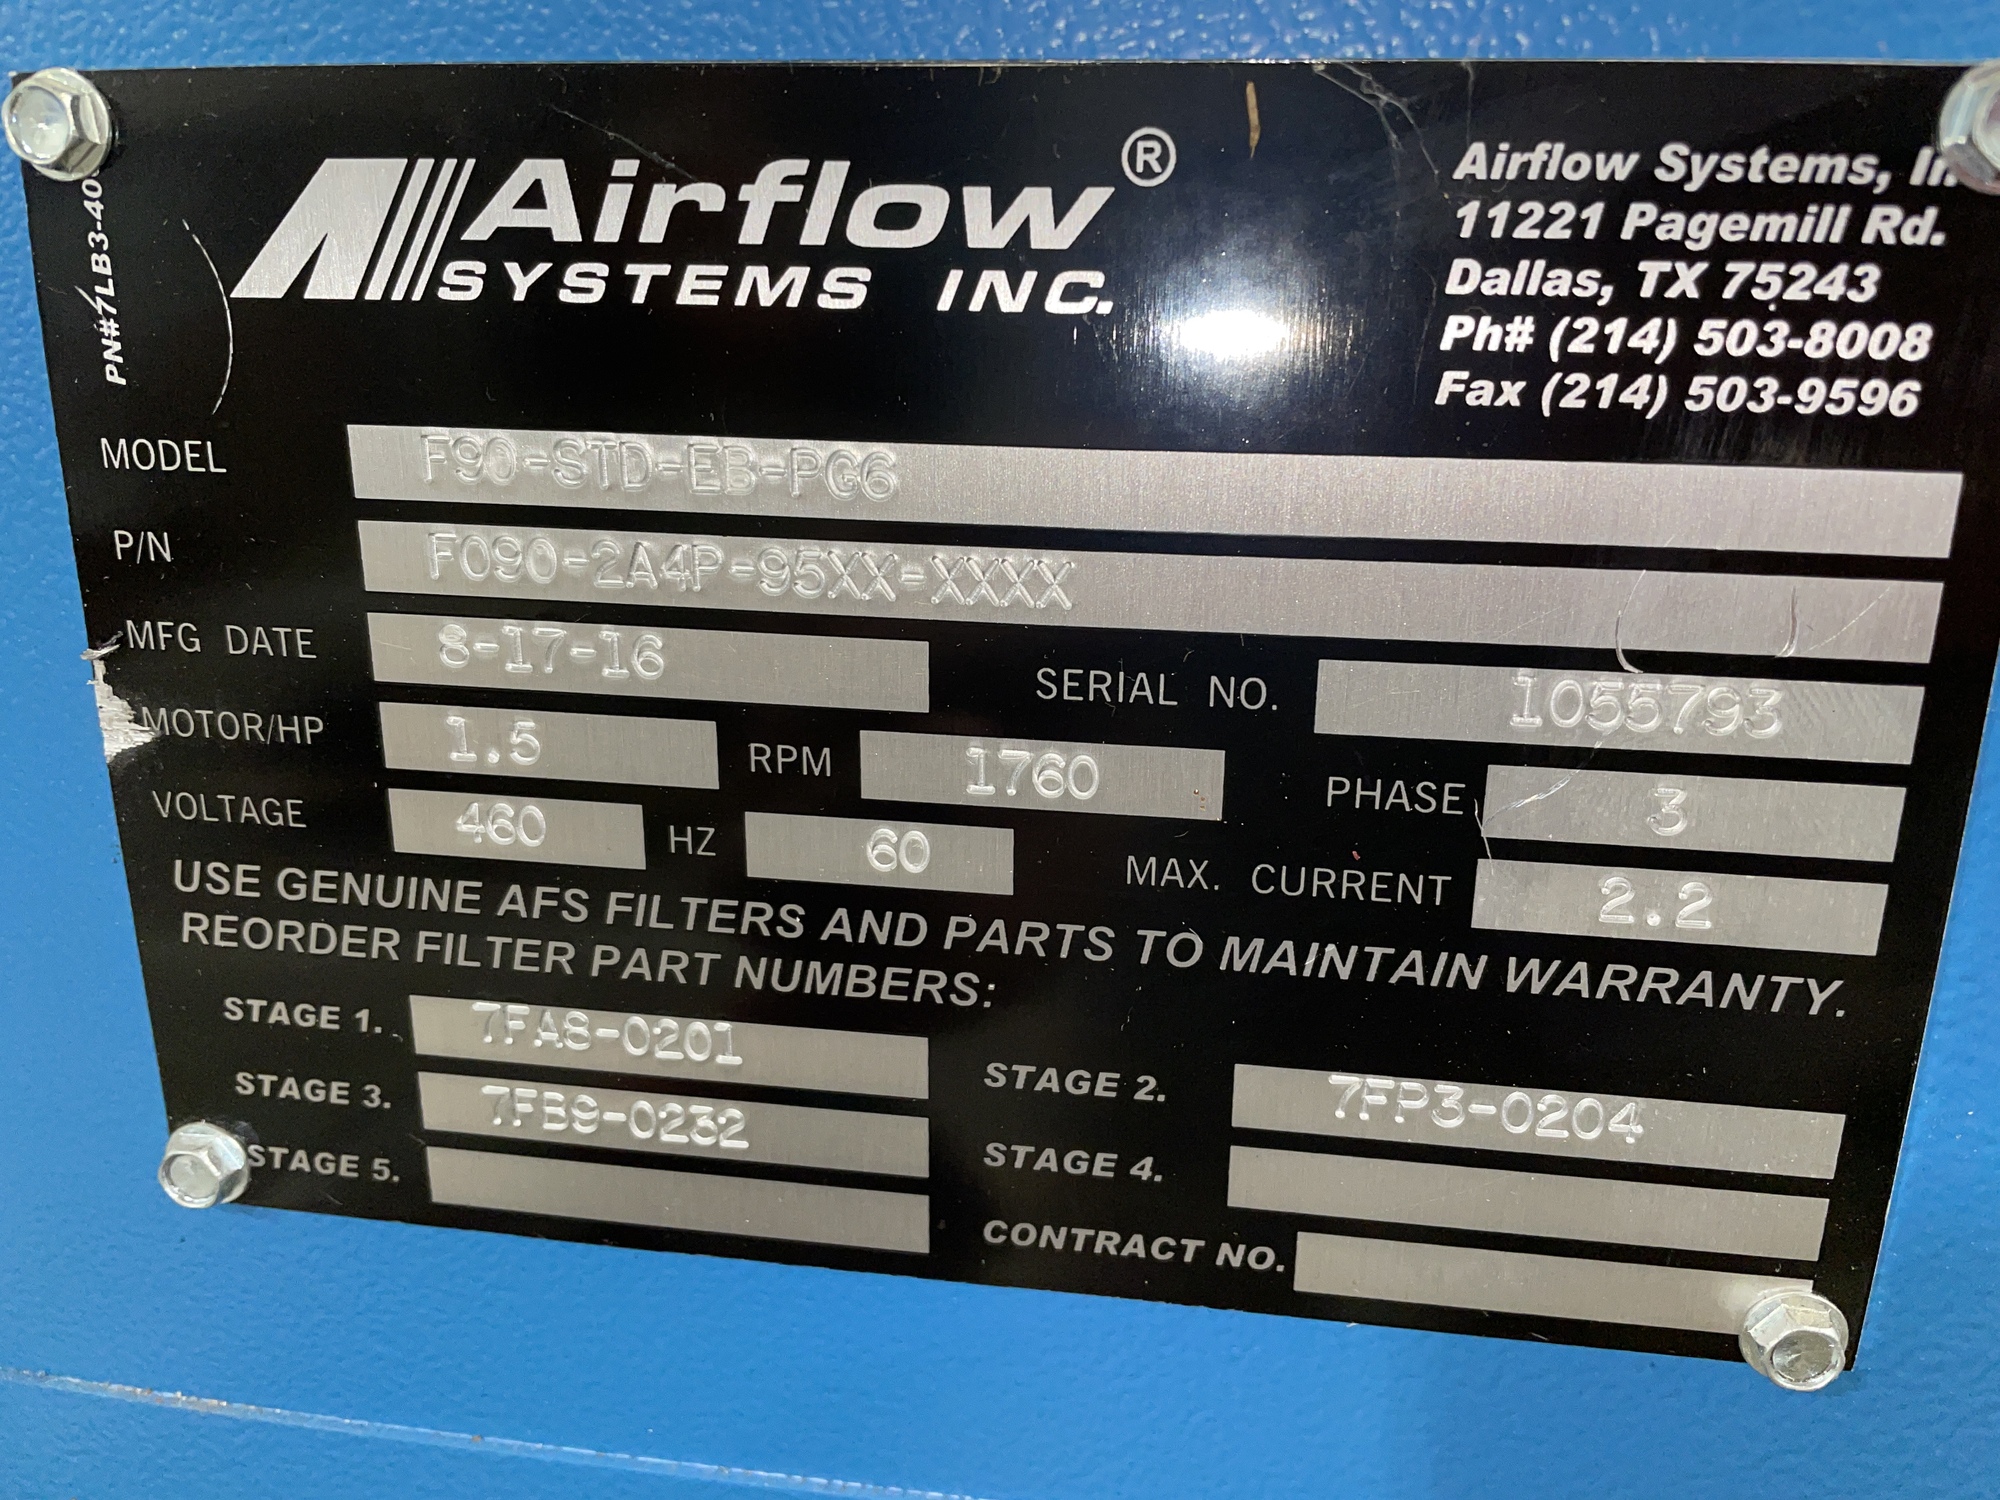 2016 AIRFLOW SYSTEMS F90-STD-EB-PG6 Air Cleaner | New England Industrial Machinery